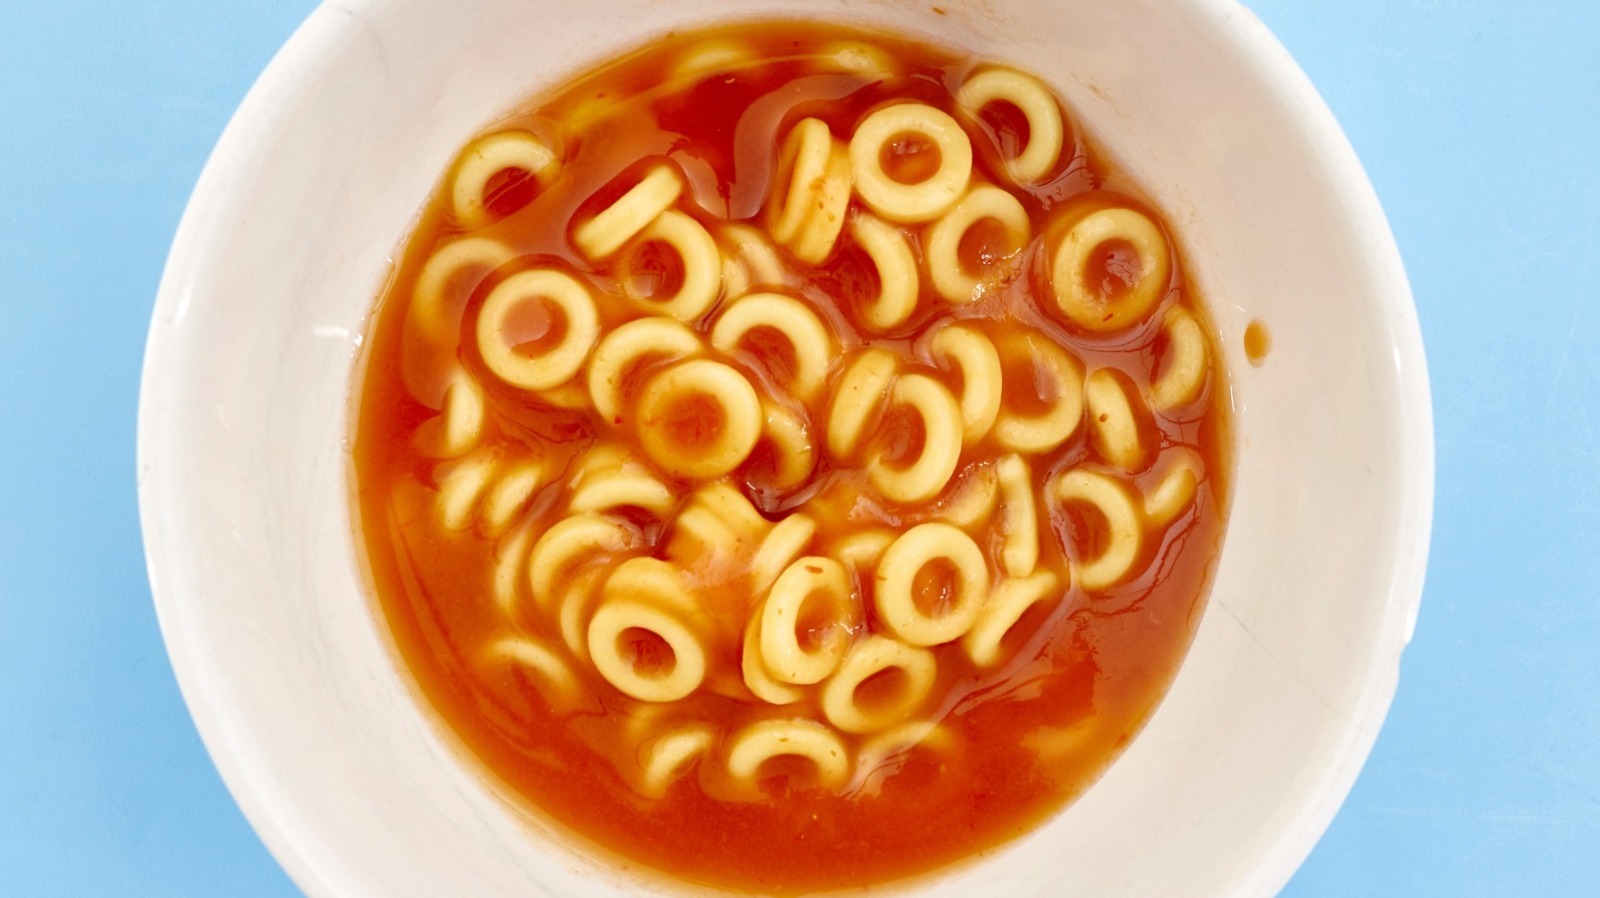 https://www.mashed.com/img/gallery/spaghettios-limited-edition-lunchbox-will-remind-you-of-your-childhood/l-intro-1651613540.jpg